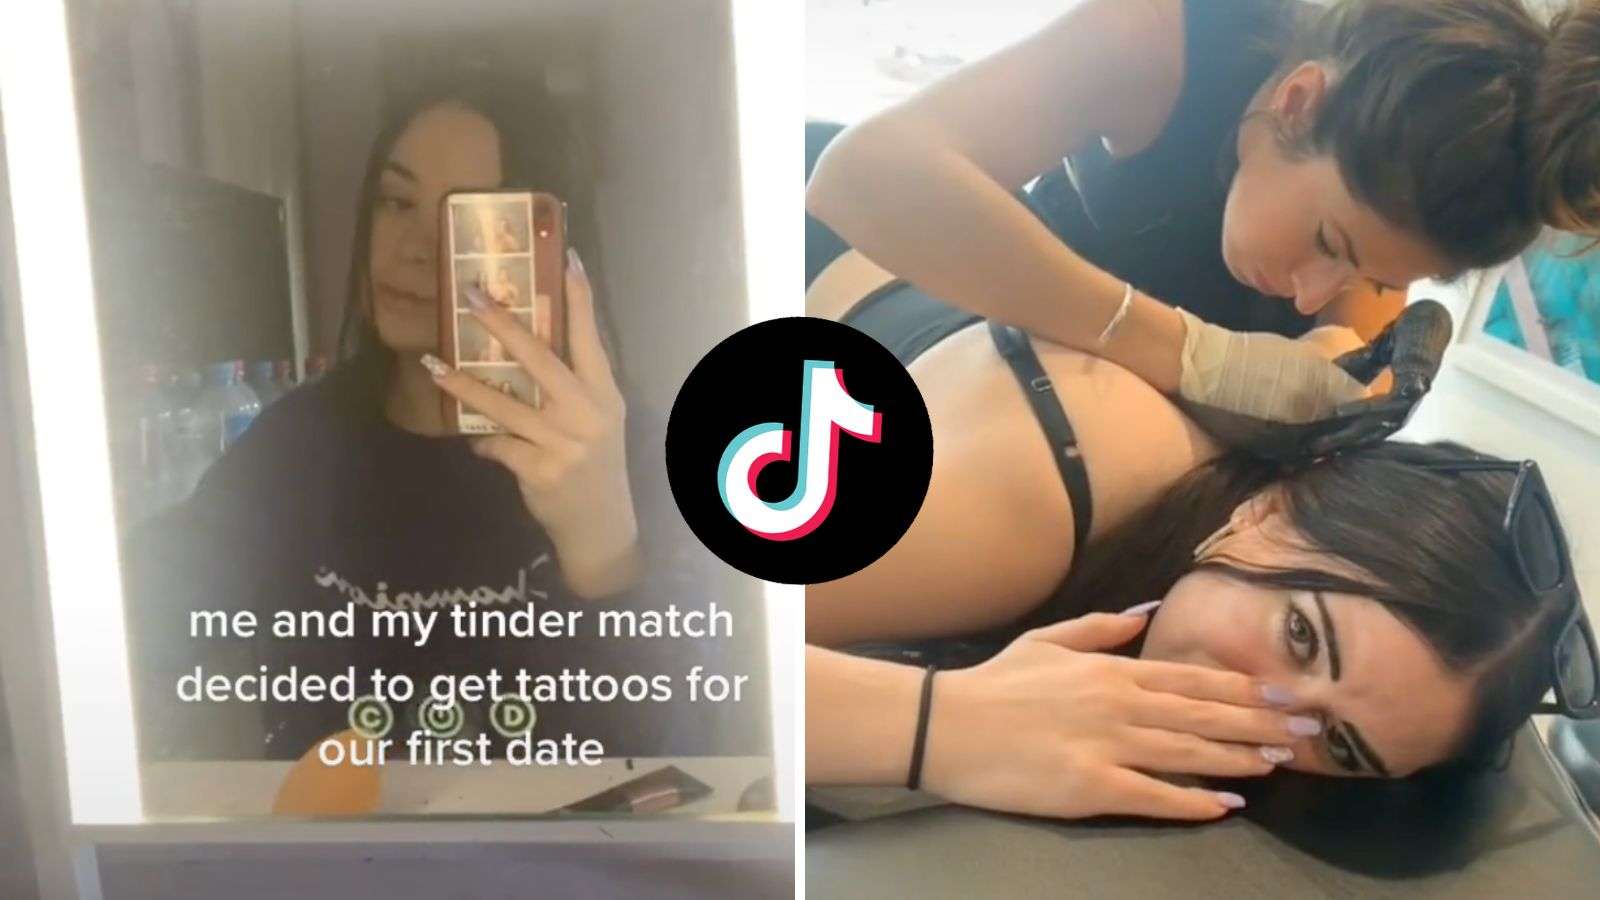 TikToker films herself getting a tattoo with Tinder match on first date